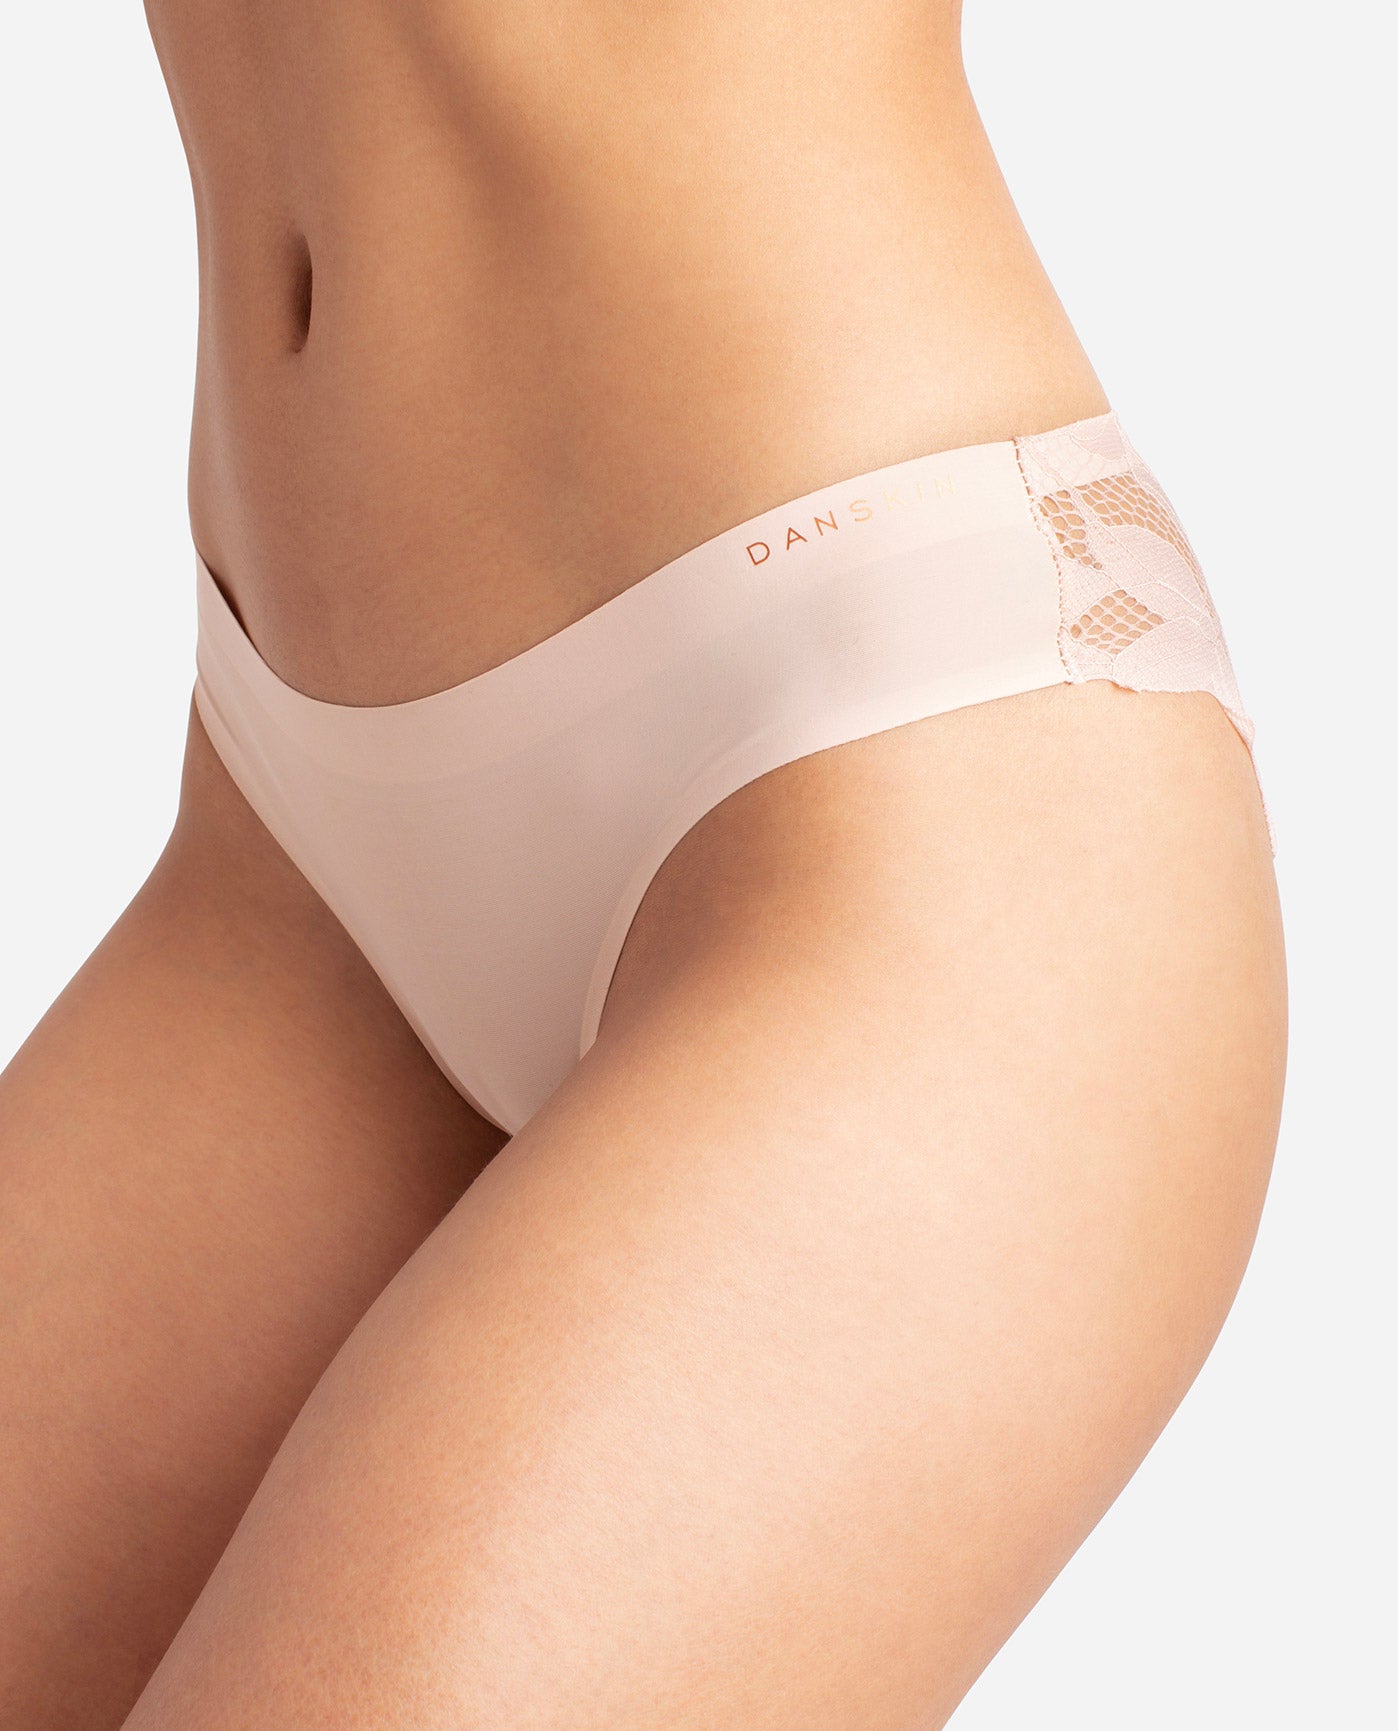 Black/White/Nude Thong Microfibre Knickers 5 Pack